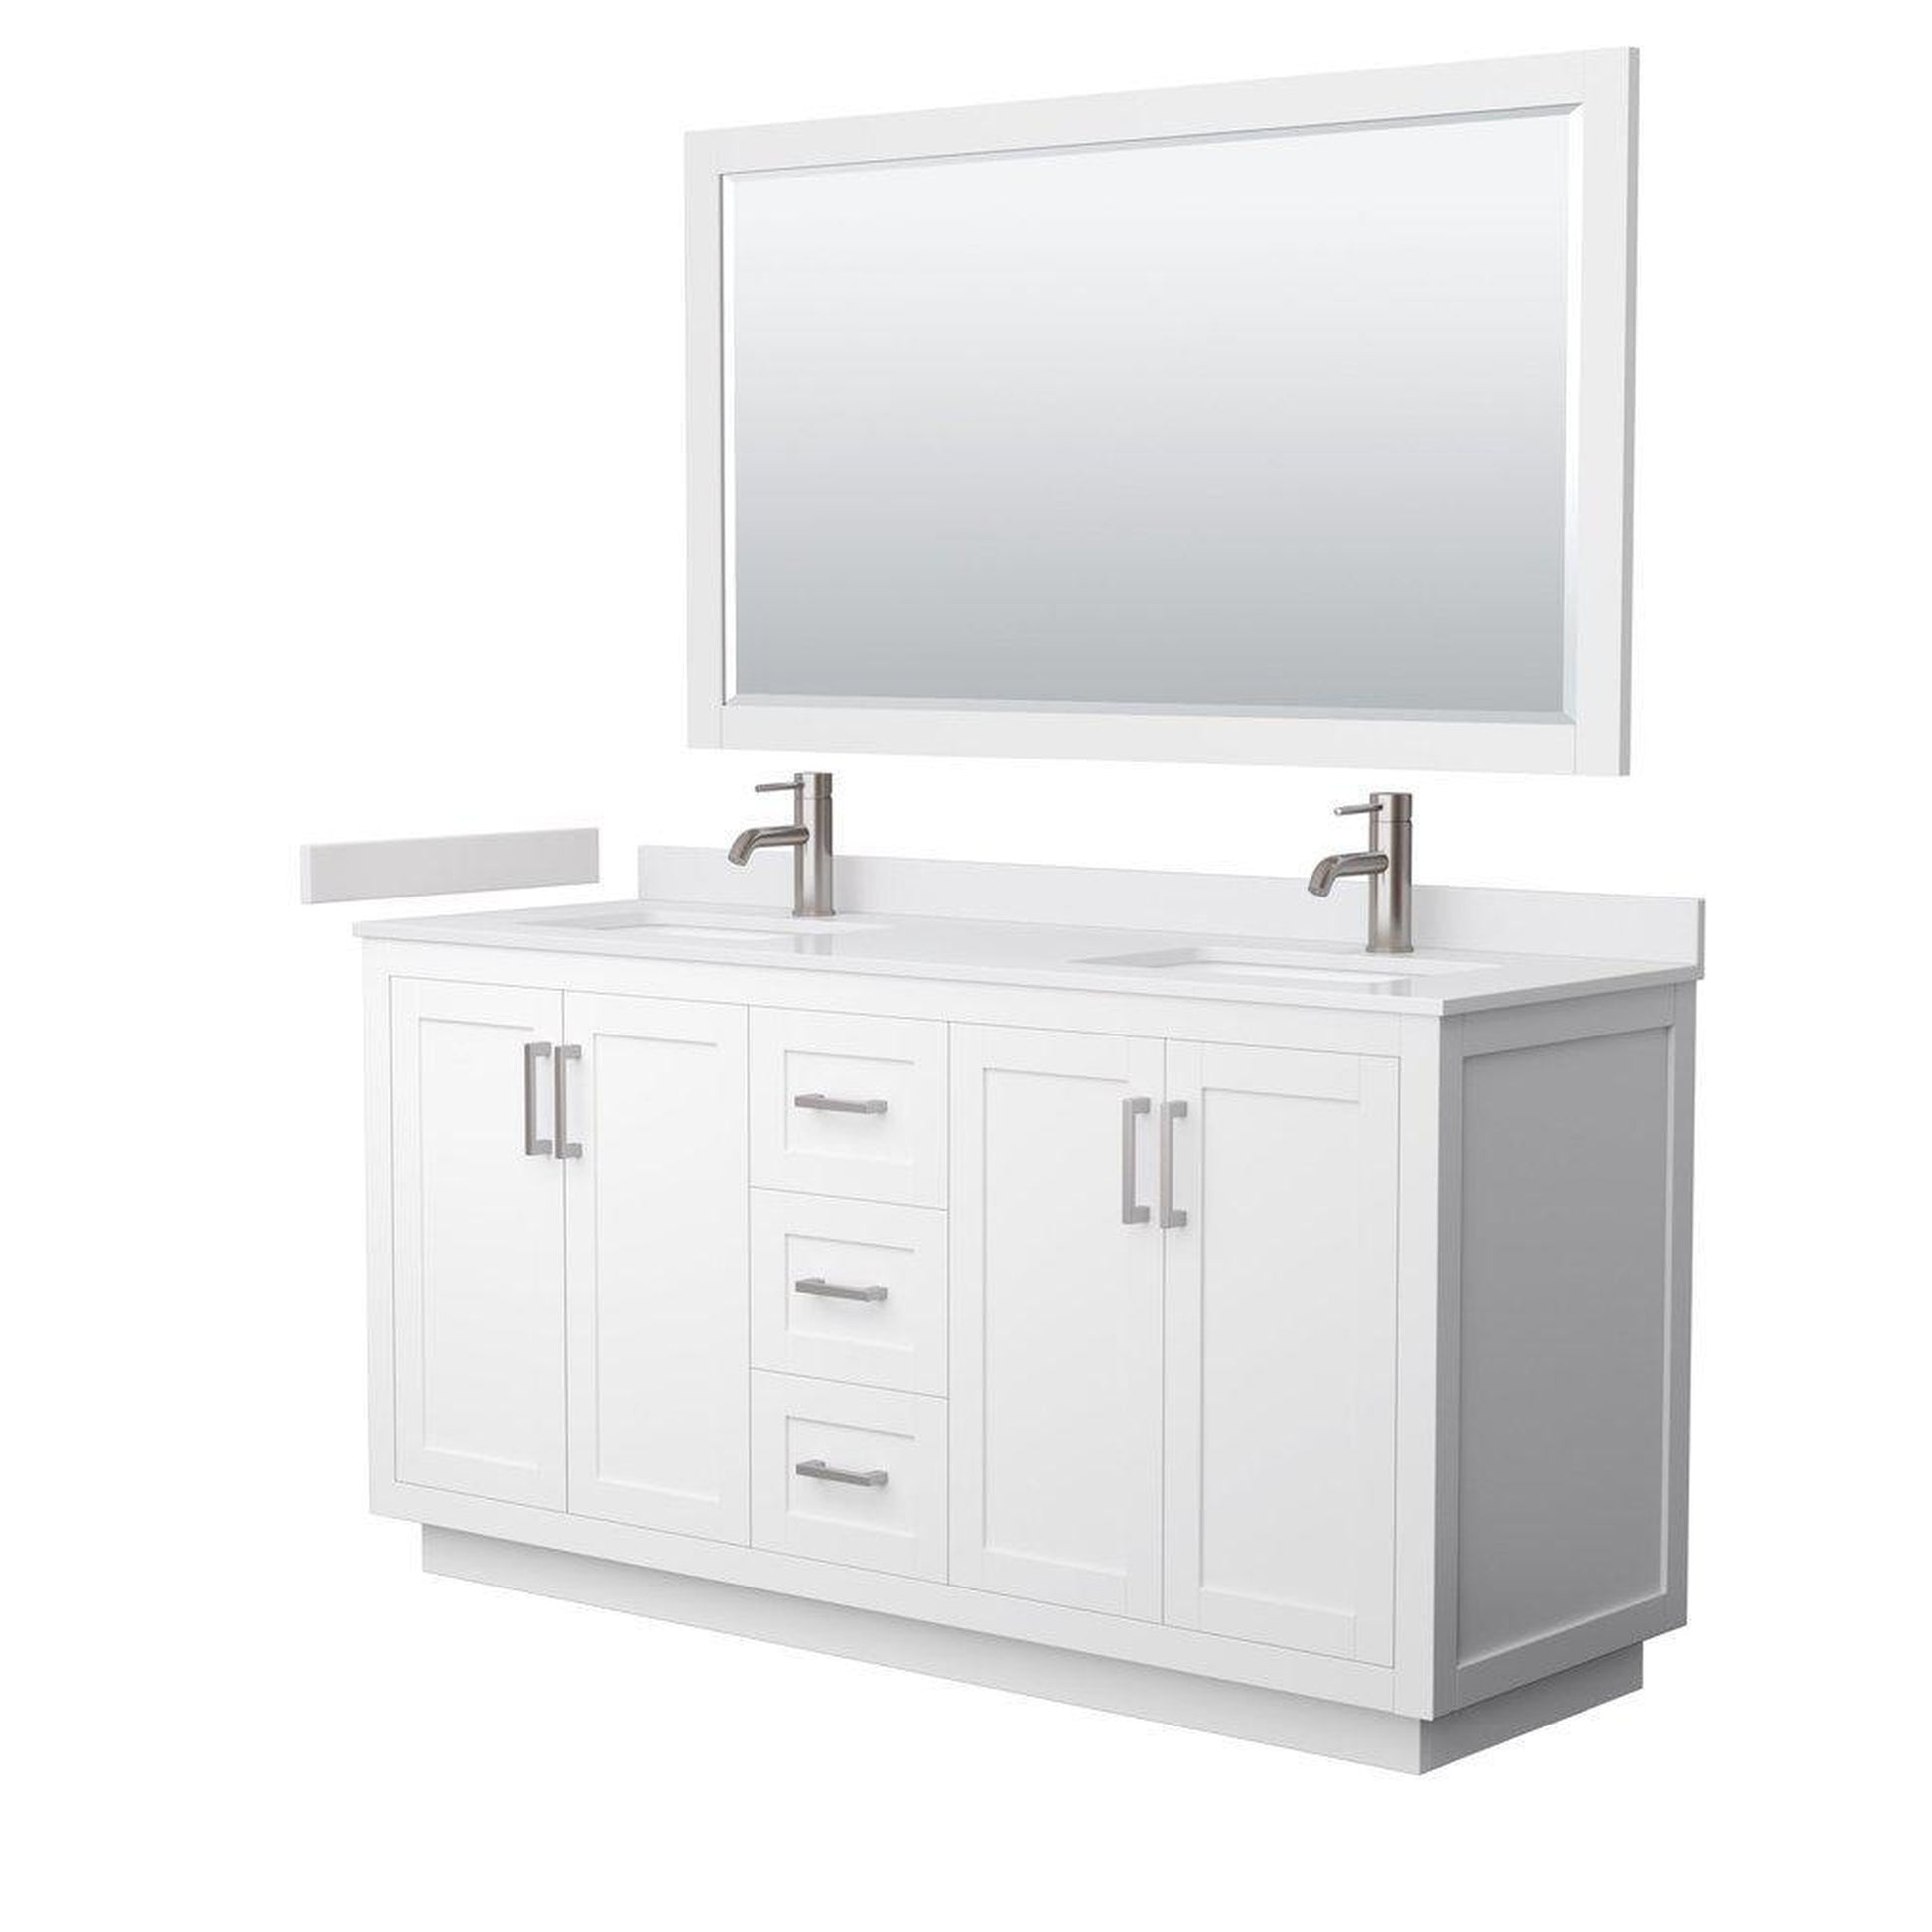 Wyndham Collection Miranda 66" Double Bathroom White Vanity Set With White Cultured Marble Countertop, Undermount Square Sink, 58" Mirror And Brushed Nickel Trim